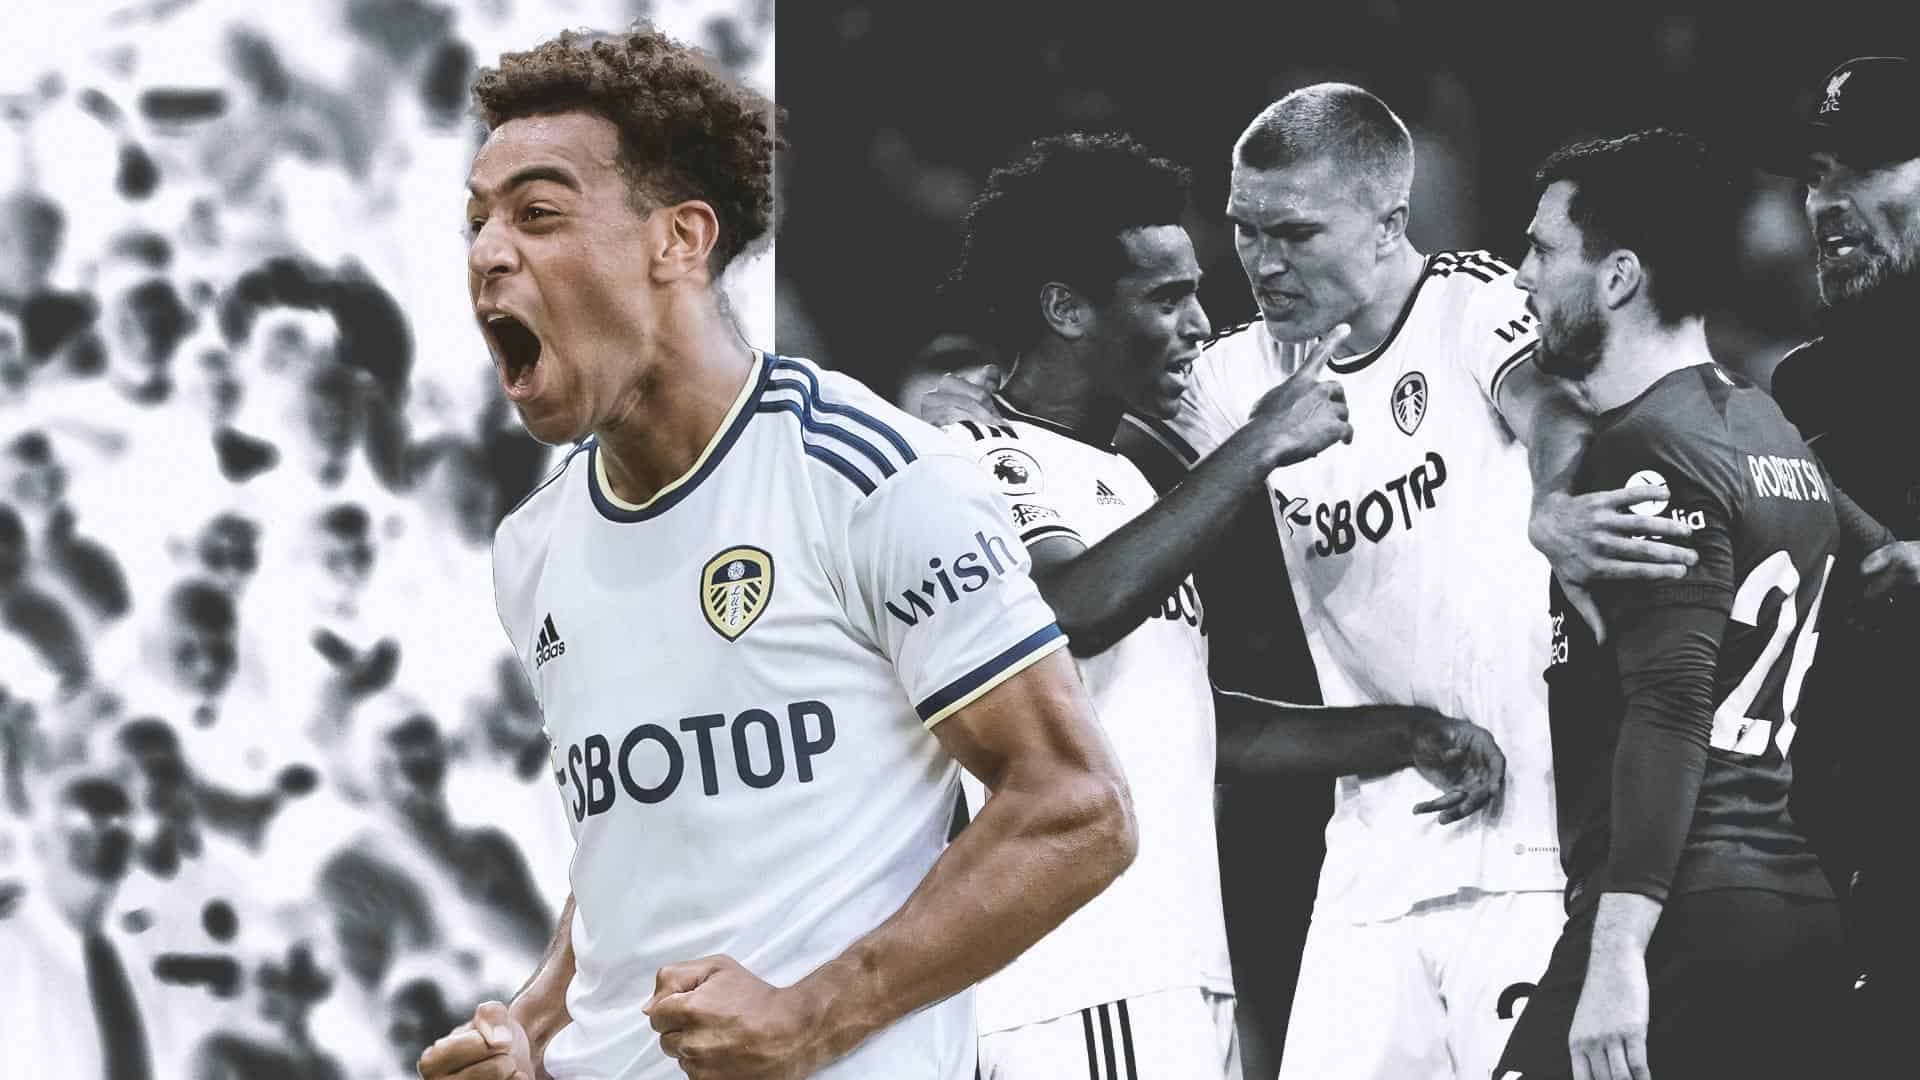 A collage of Leeds fans celebrating at Liverpool, Tyler Adams squaring up to Andy Robertson, and Adams celebrating